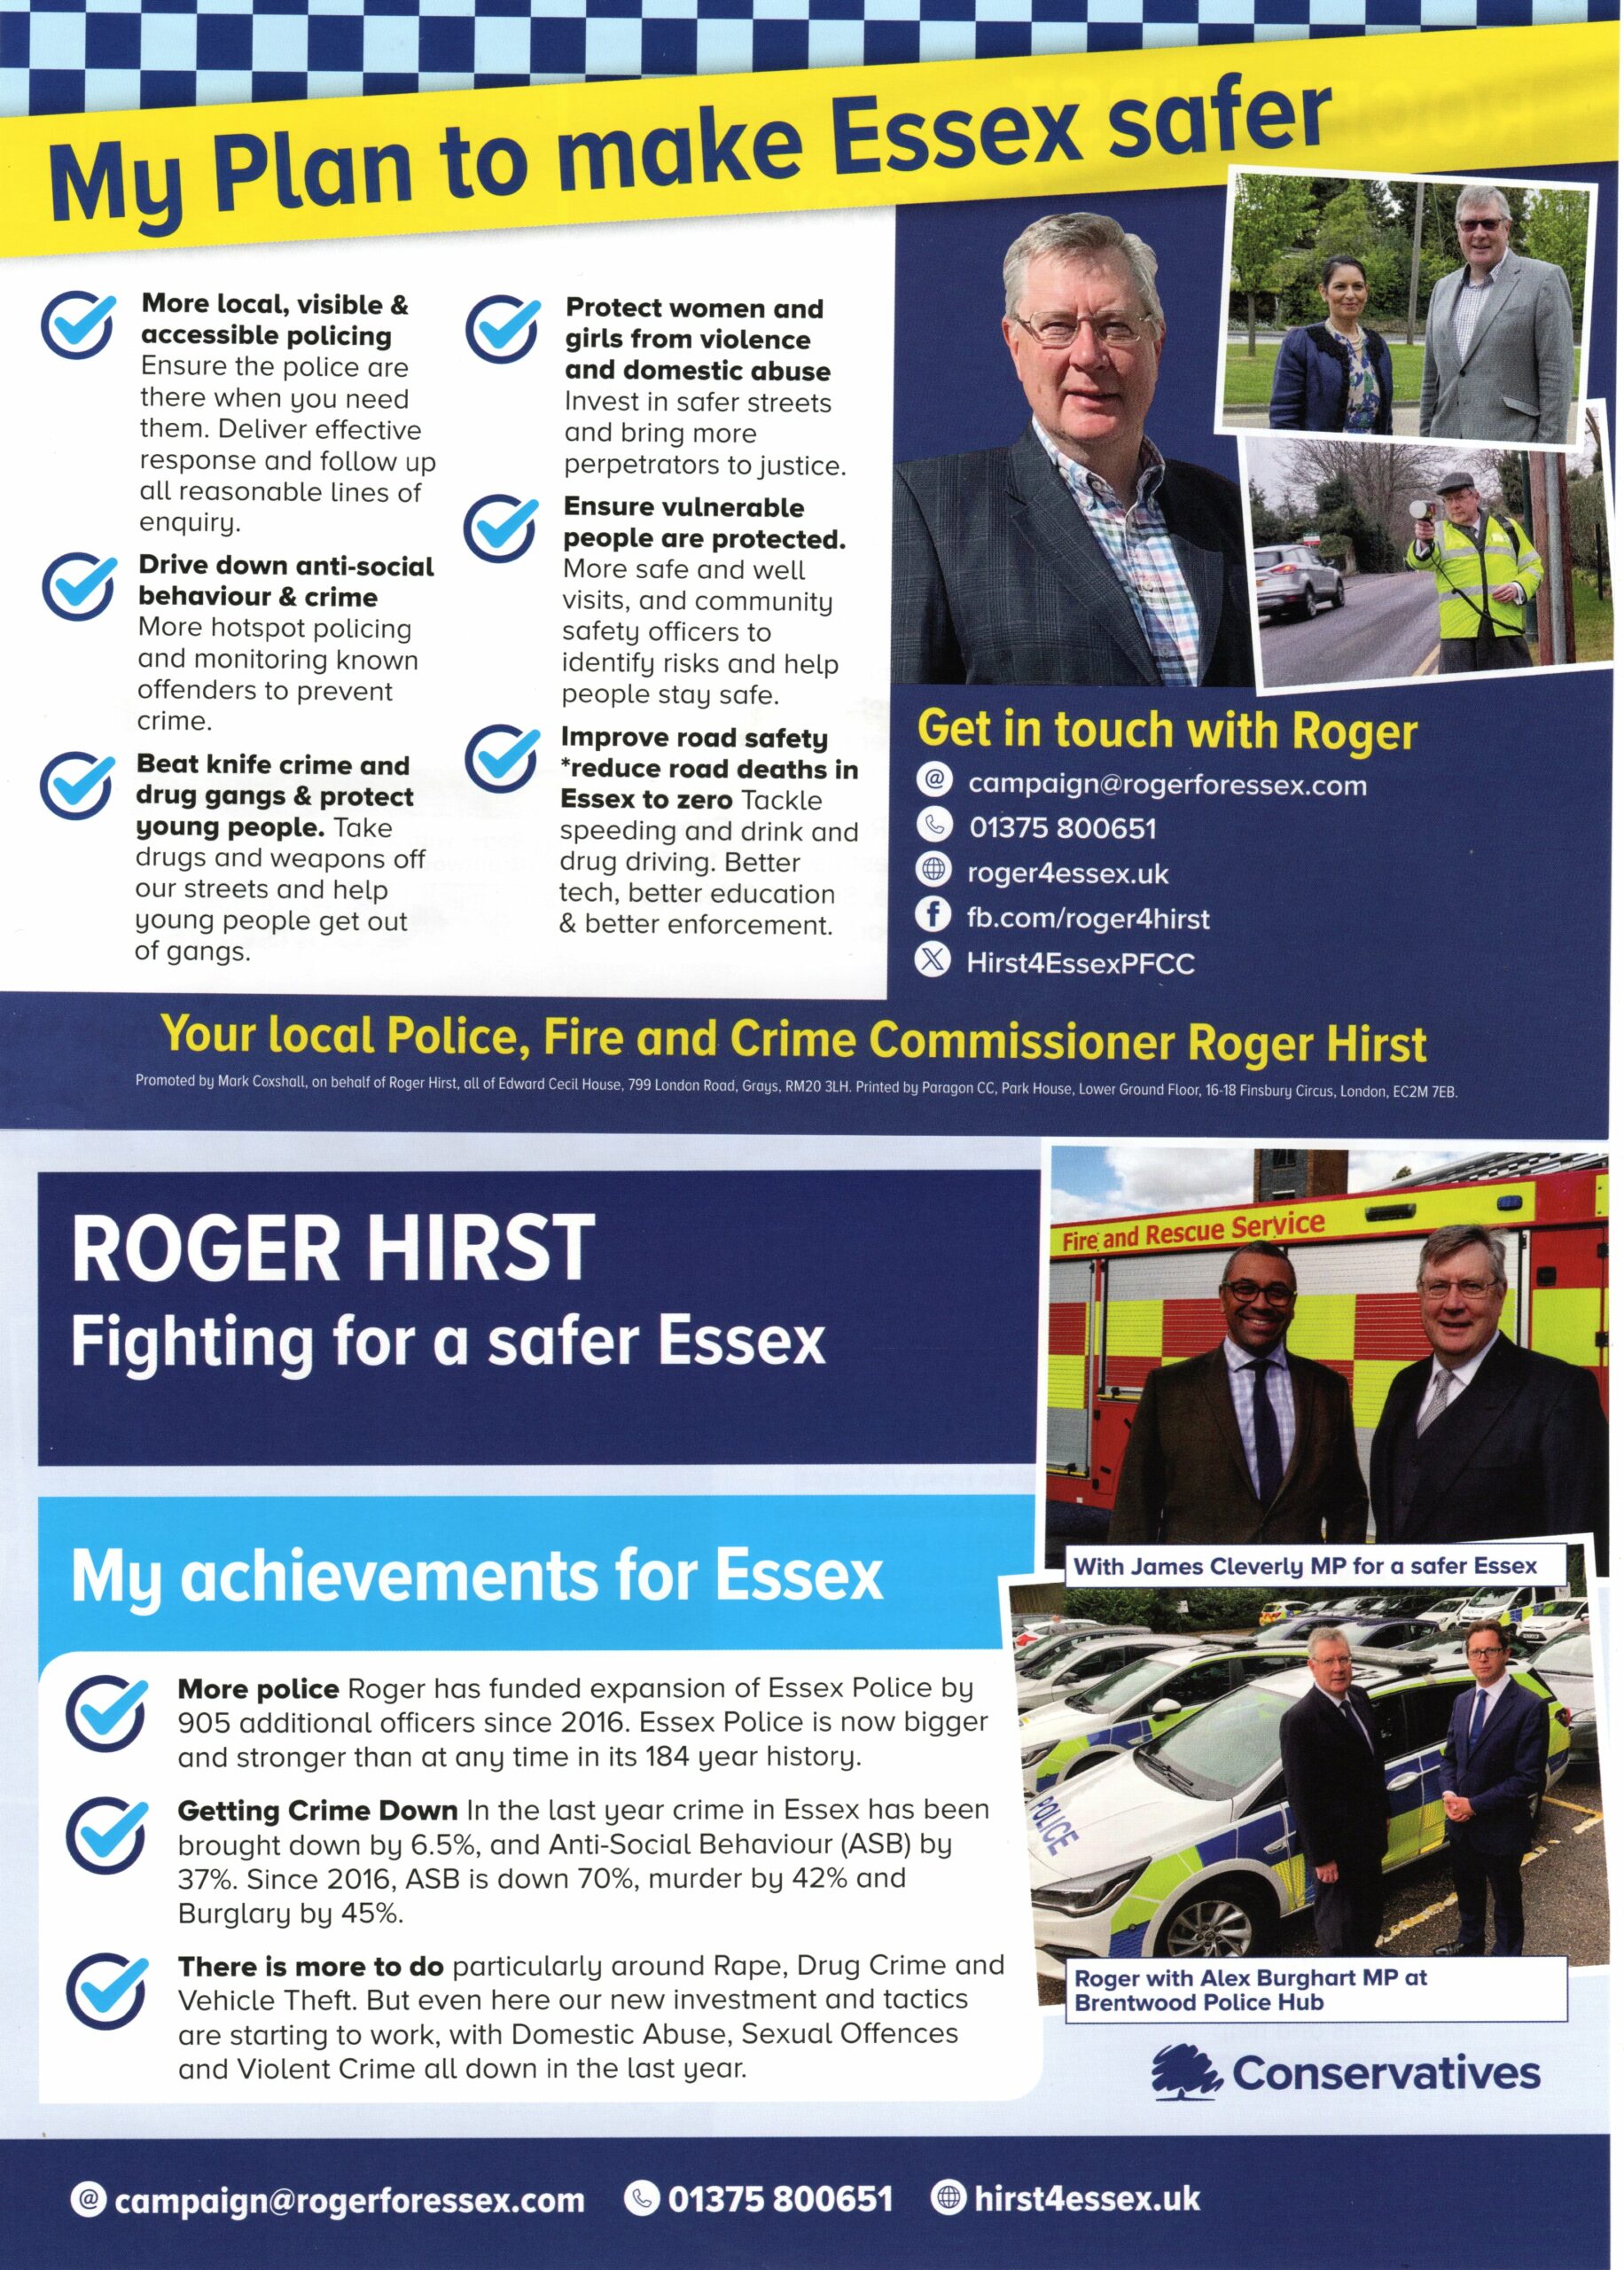 Roger Hirst - Conservative candidate for the role of Essex Police, Fire and Crime Commissioner.